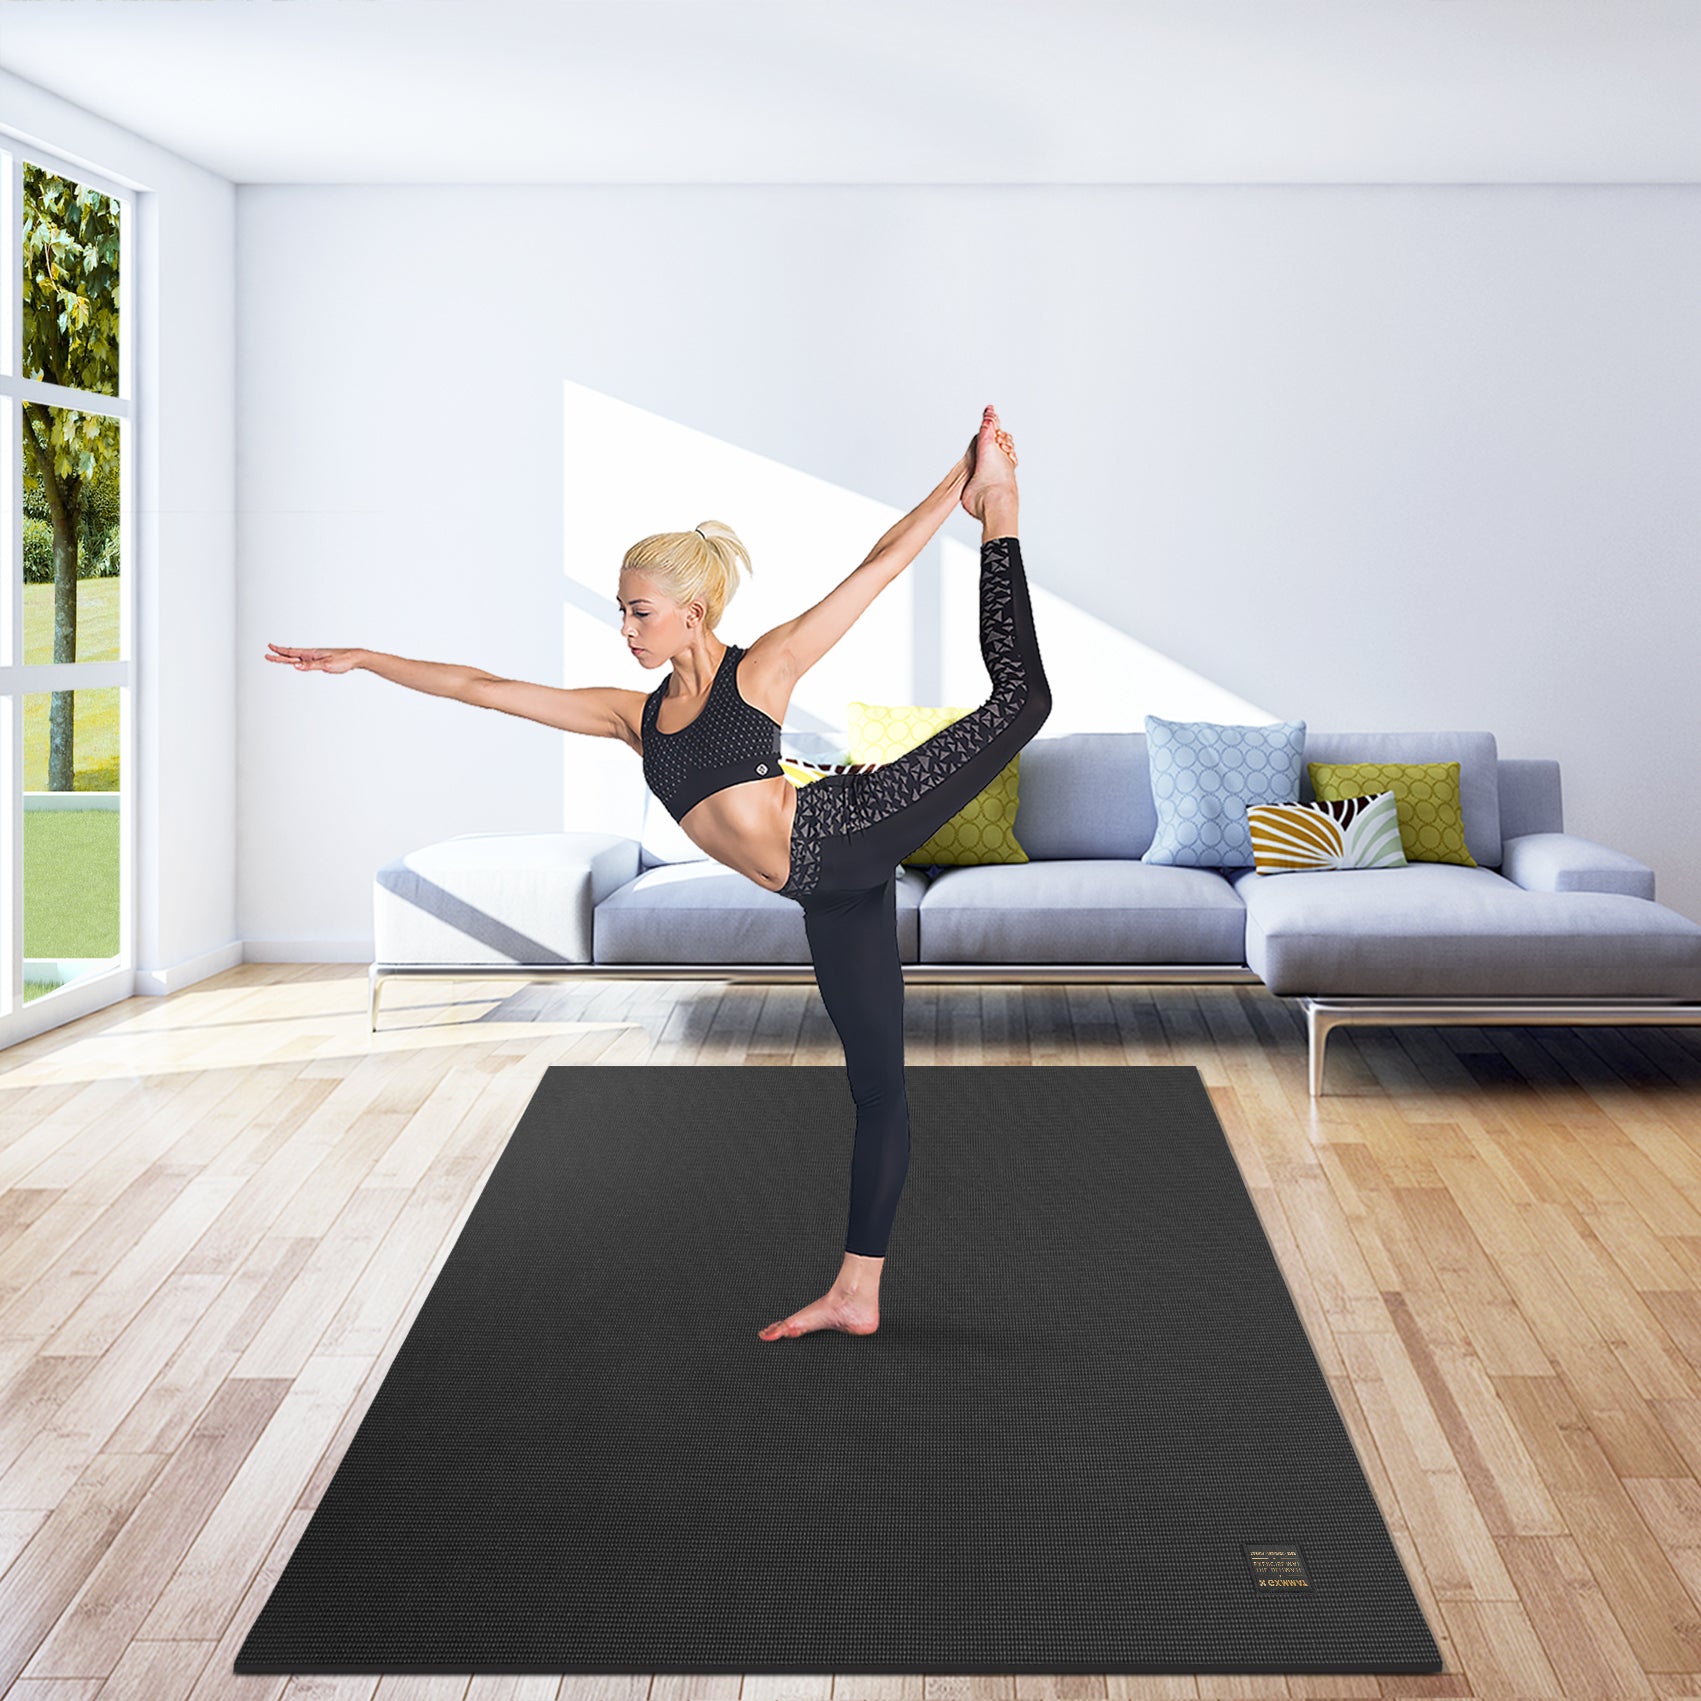 Buy Respire Fitness Yoga Mat for Men and Women, 185 x 60 cm, Extra Thick  15mm Cushion with Smooth and Ribbed Surfaces, Non-Slip Sweat Resistant  Material for Pilates, Stretching, Fitness, and Meditation